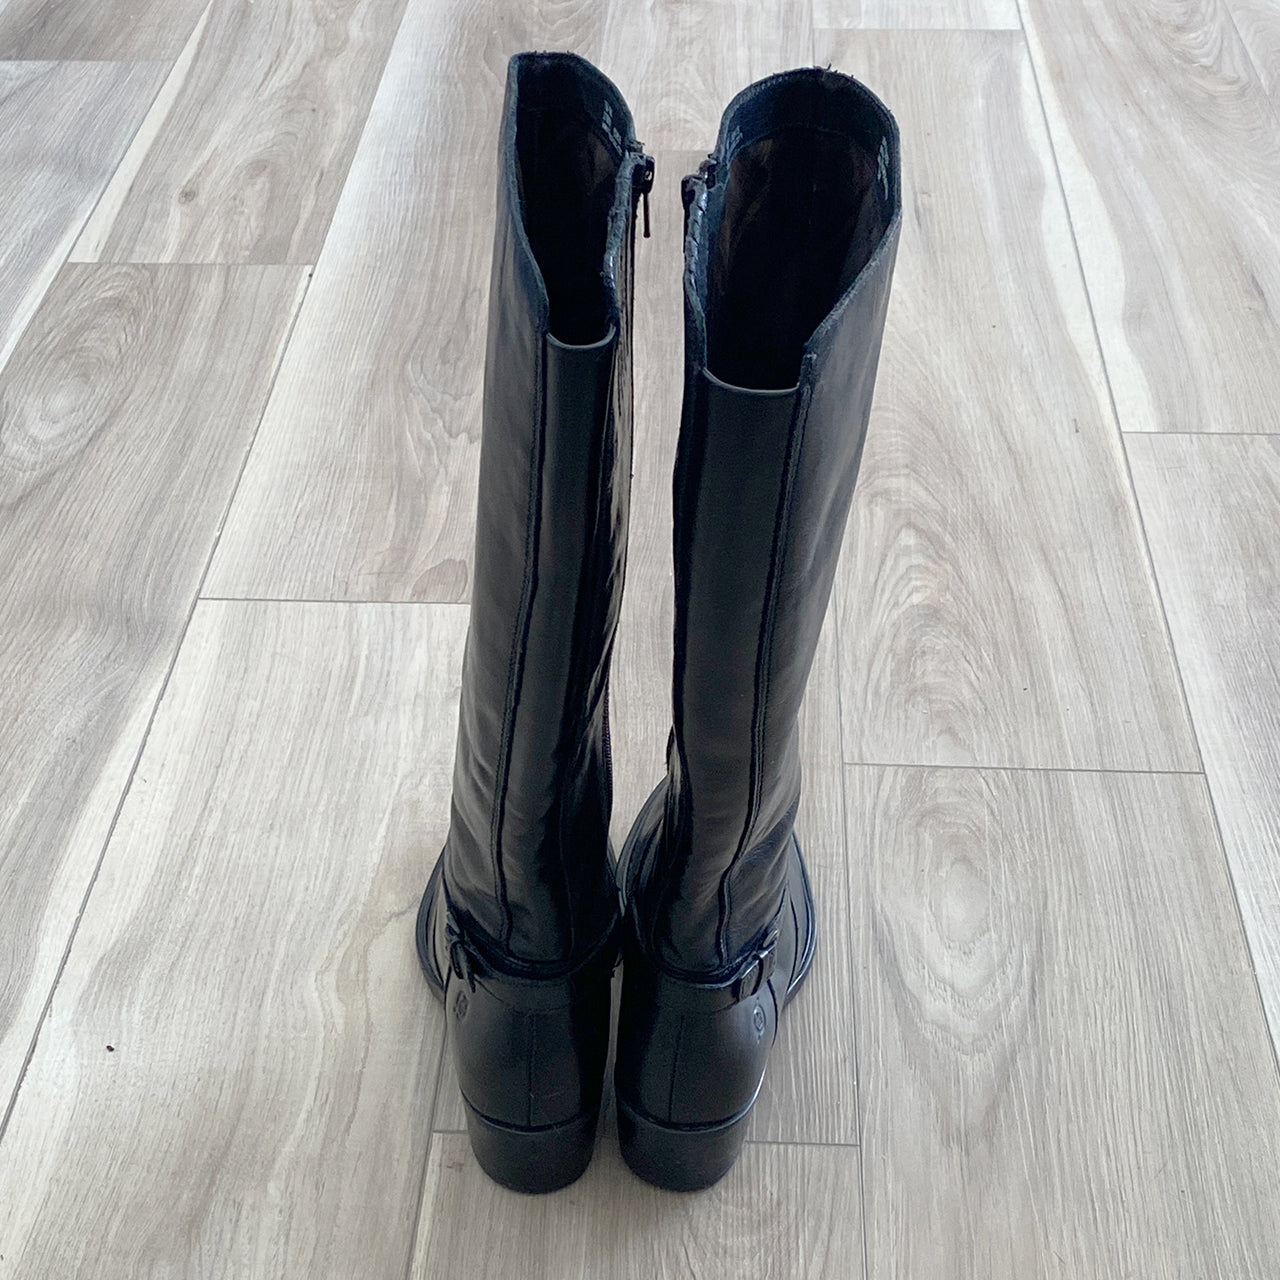 Black Knee High Leather Equestrian Riding Boots. Size 7M. Born. Helen